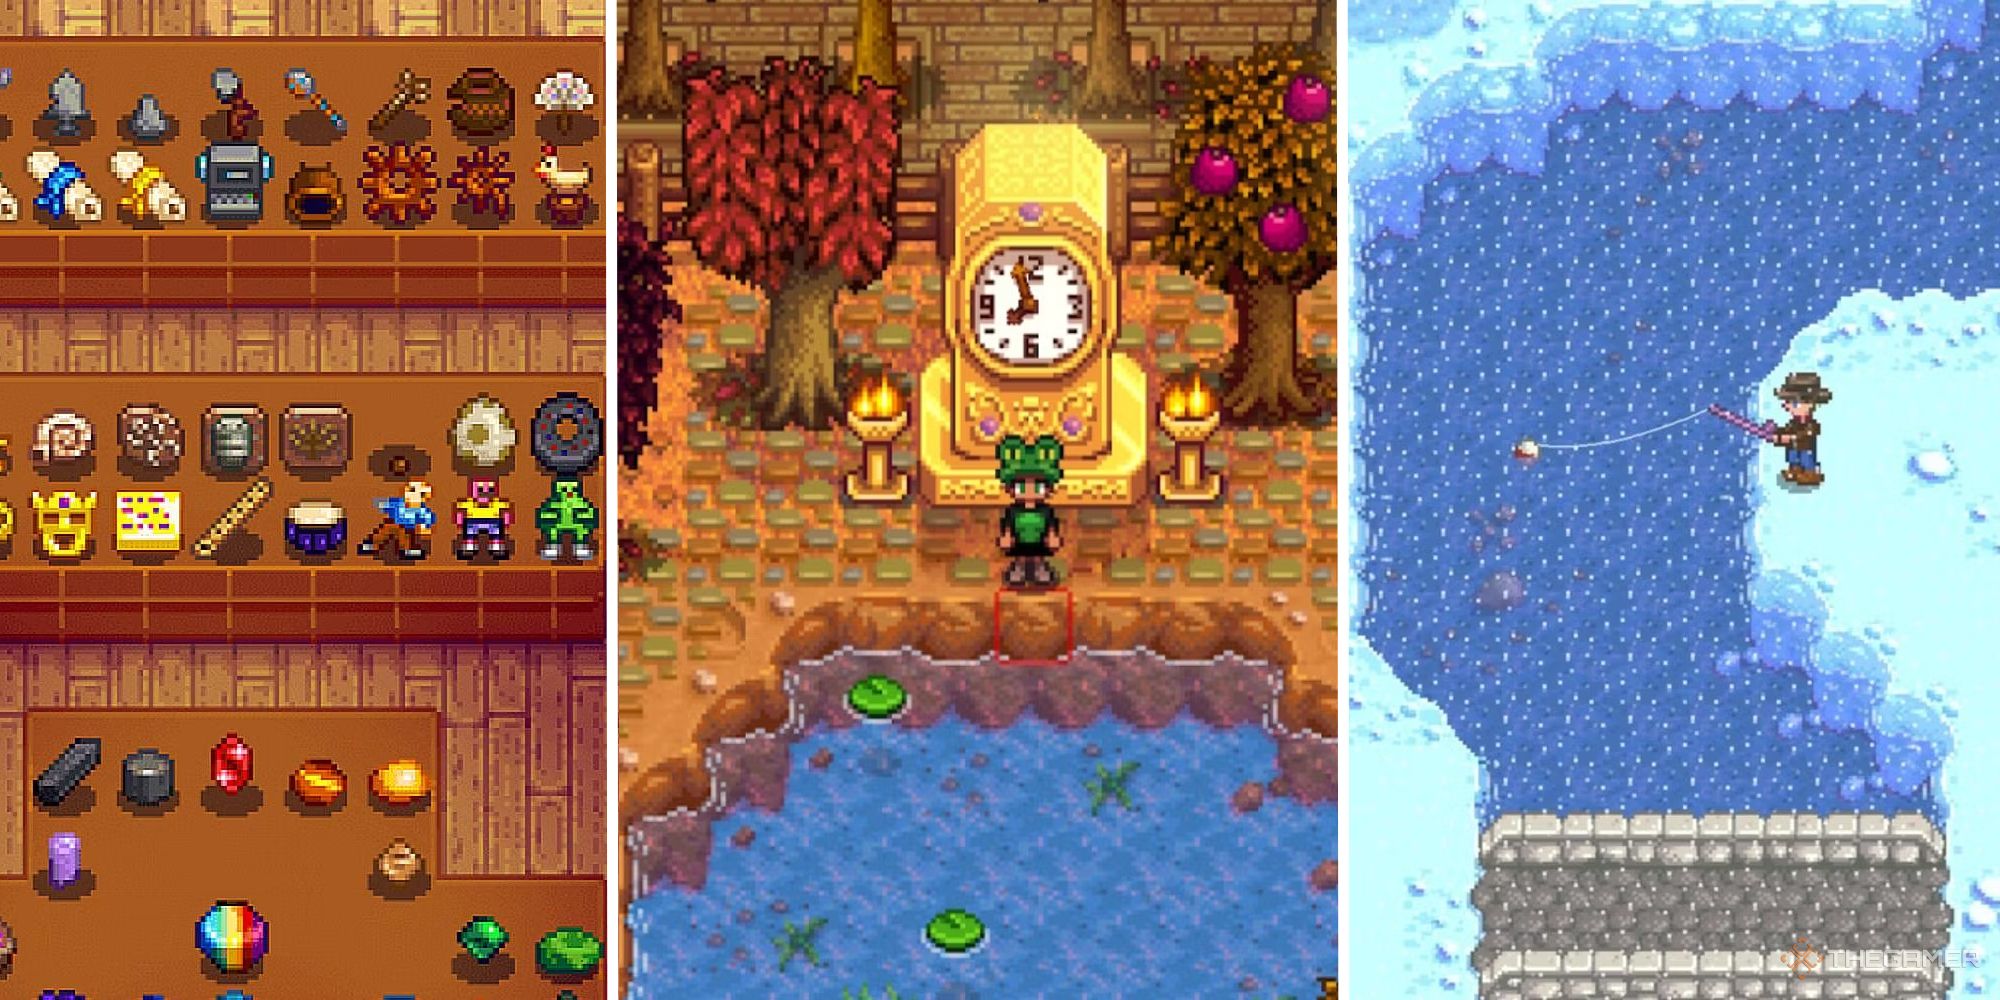 stardew valley split image showing museum. gold clock, and player fishing